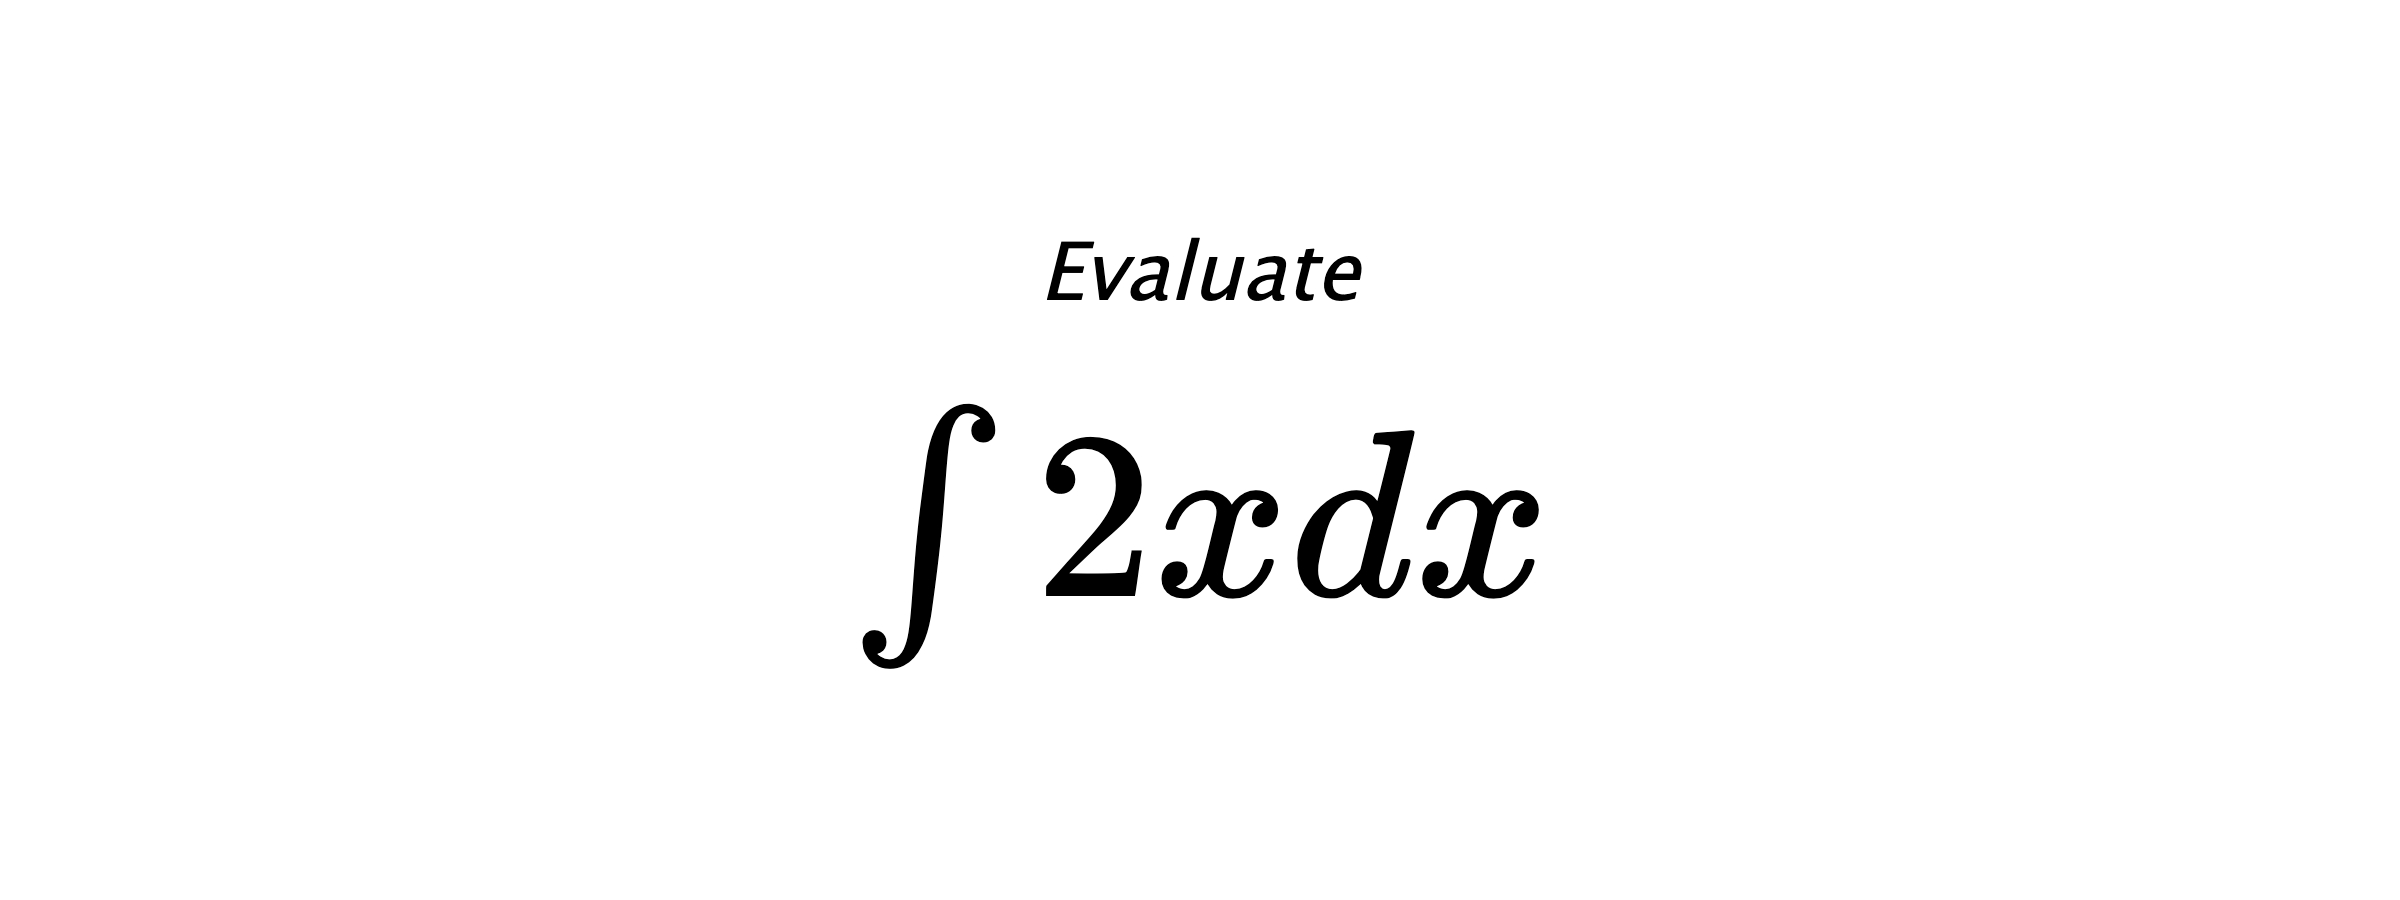 Evaluate $ \int 2 x dx $